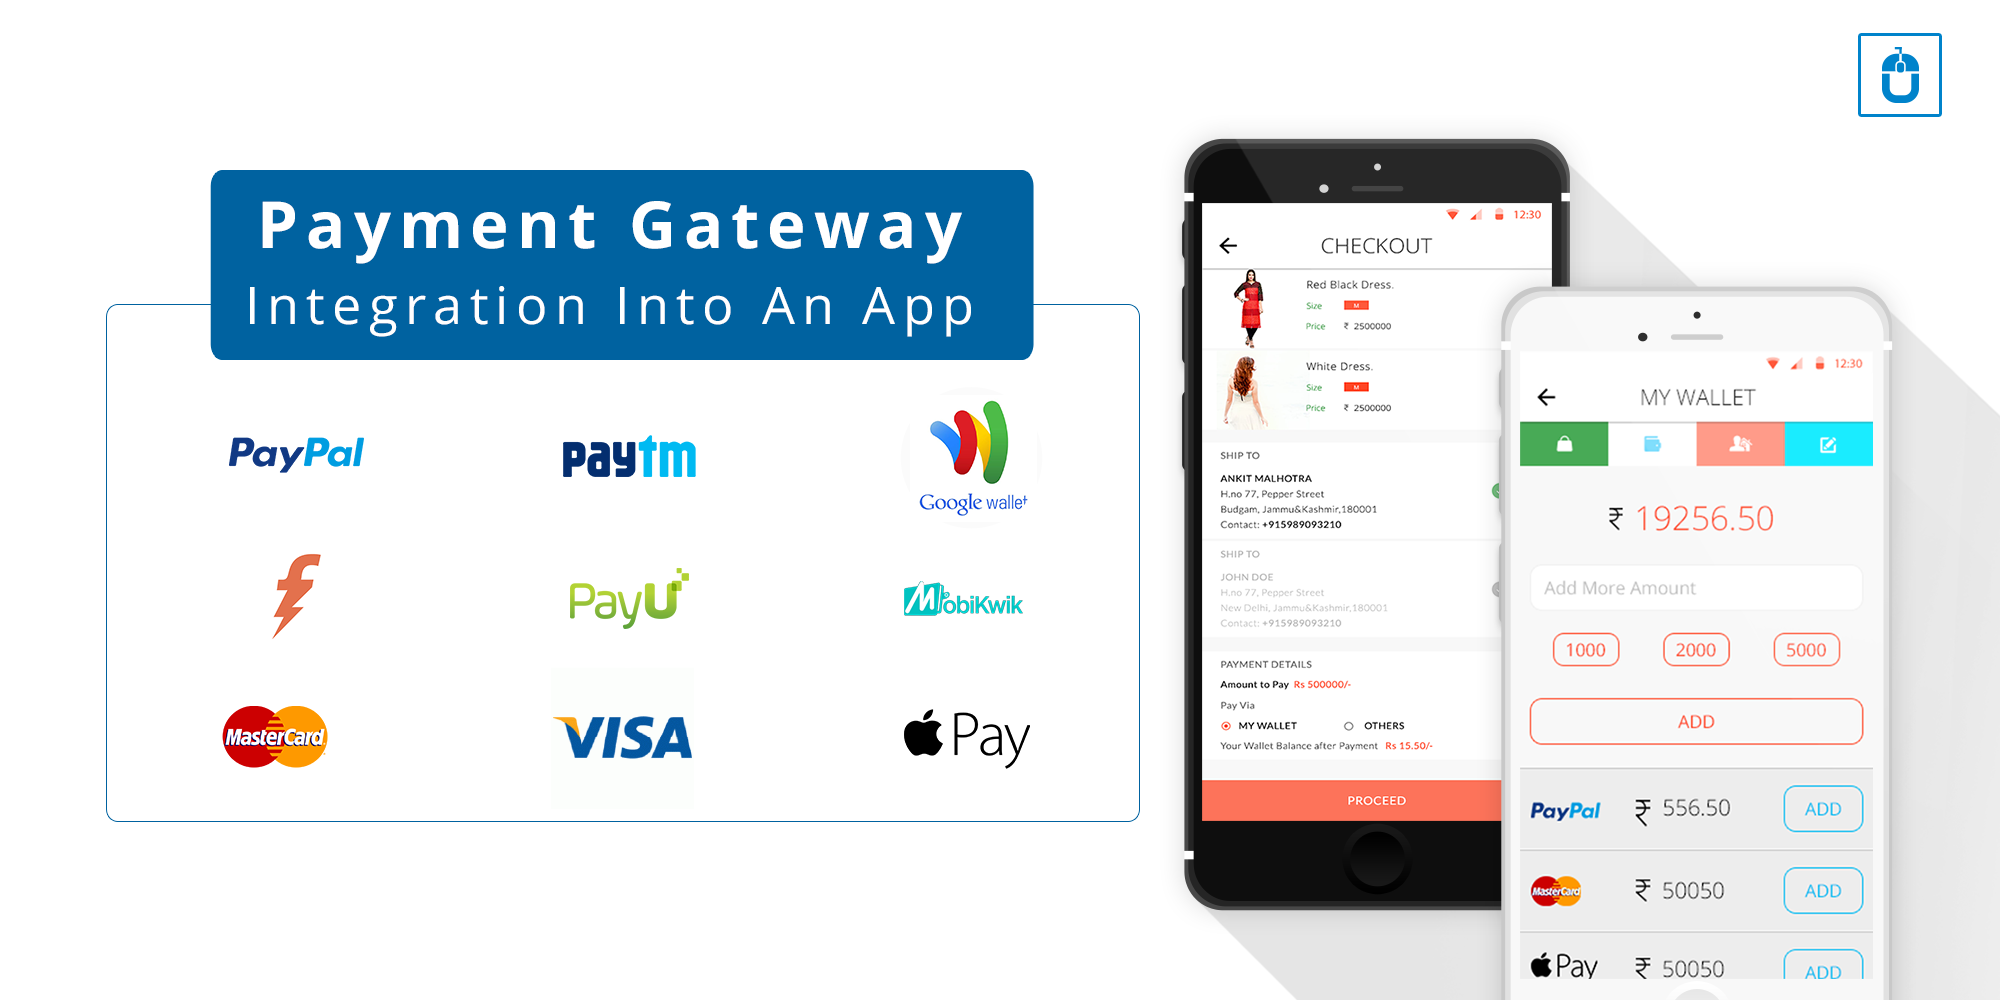 STEPS TO INTEGRATE PAYMENT GATEWAY WITHIN YOUR APP (UPDATED)